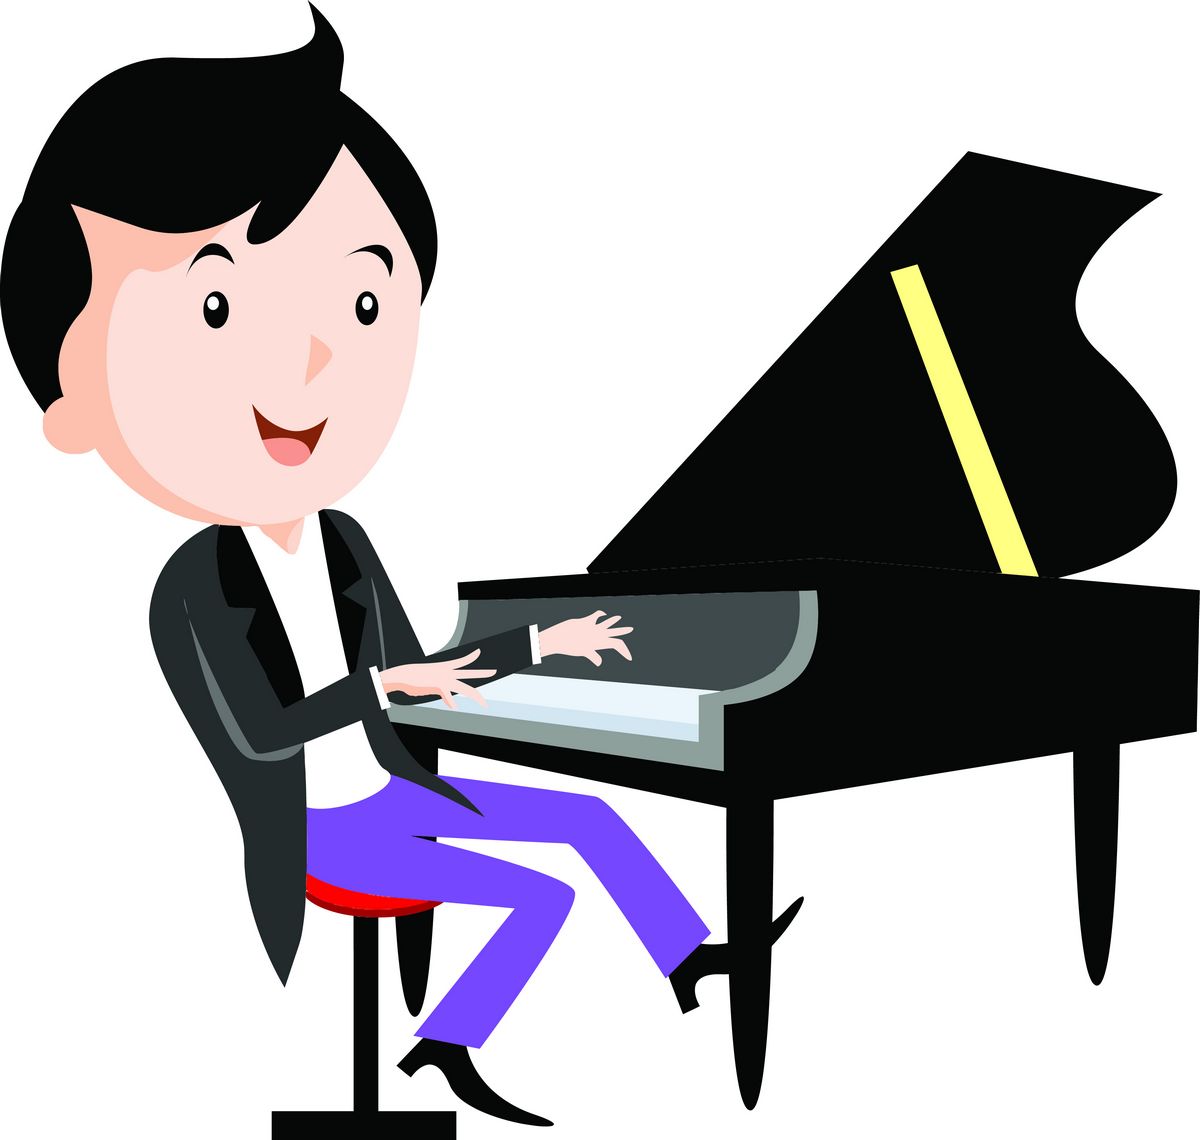 Children playing musical instruments   Piano png